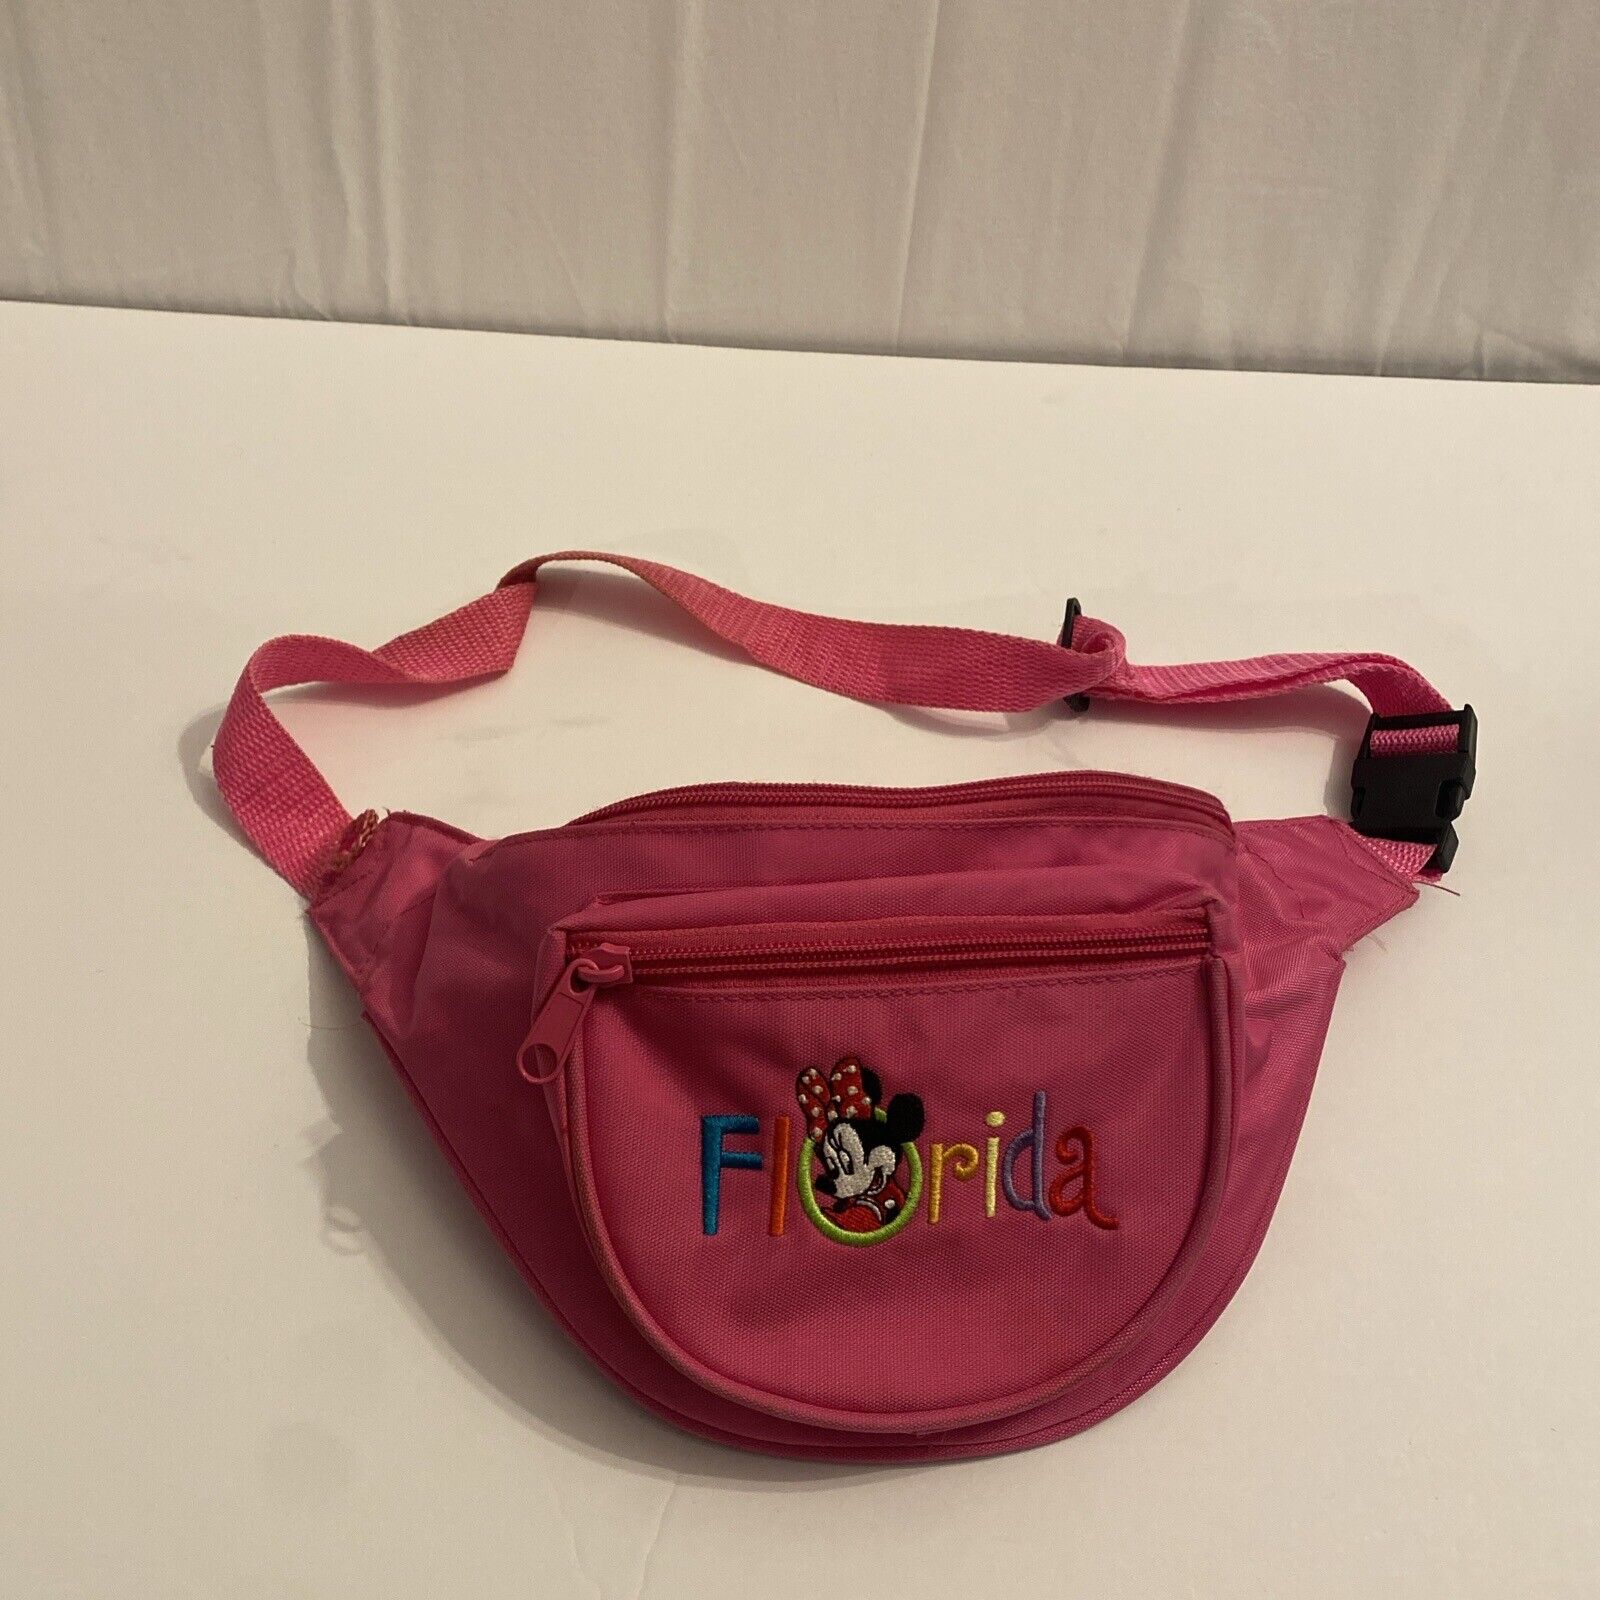 Vintage 90s Disney Minnie Mouse Florida Hot Pink Fanny Pack Women Adult Girl